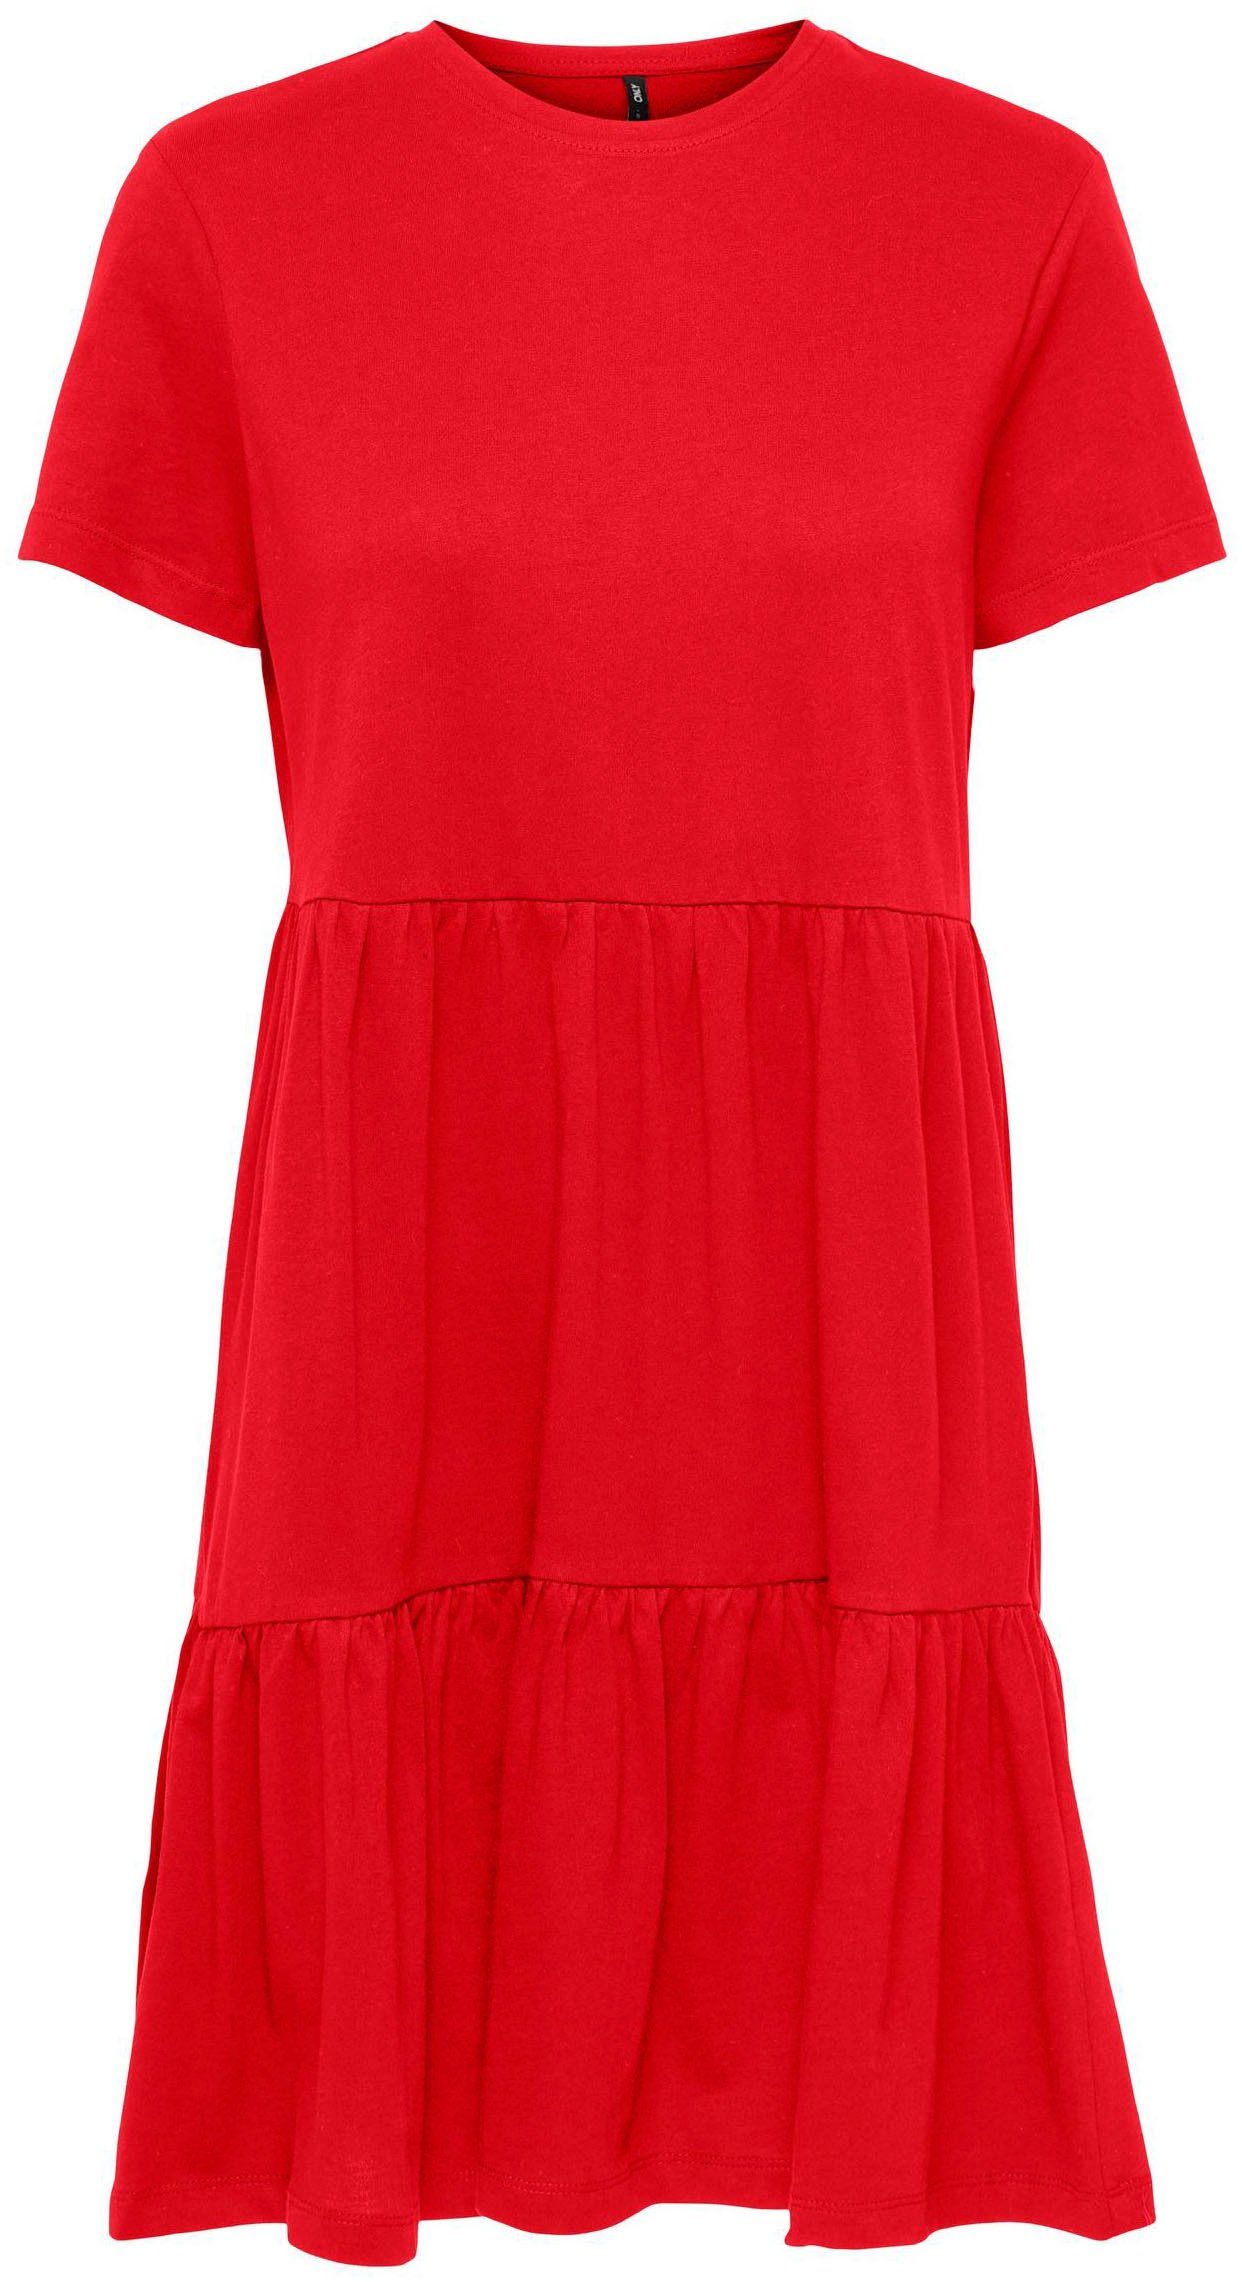 DRESS O-NECK Jerseykleid BOX Risk S/S ONLMAY PEPLUM JRS mit Red ONLY Volant High